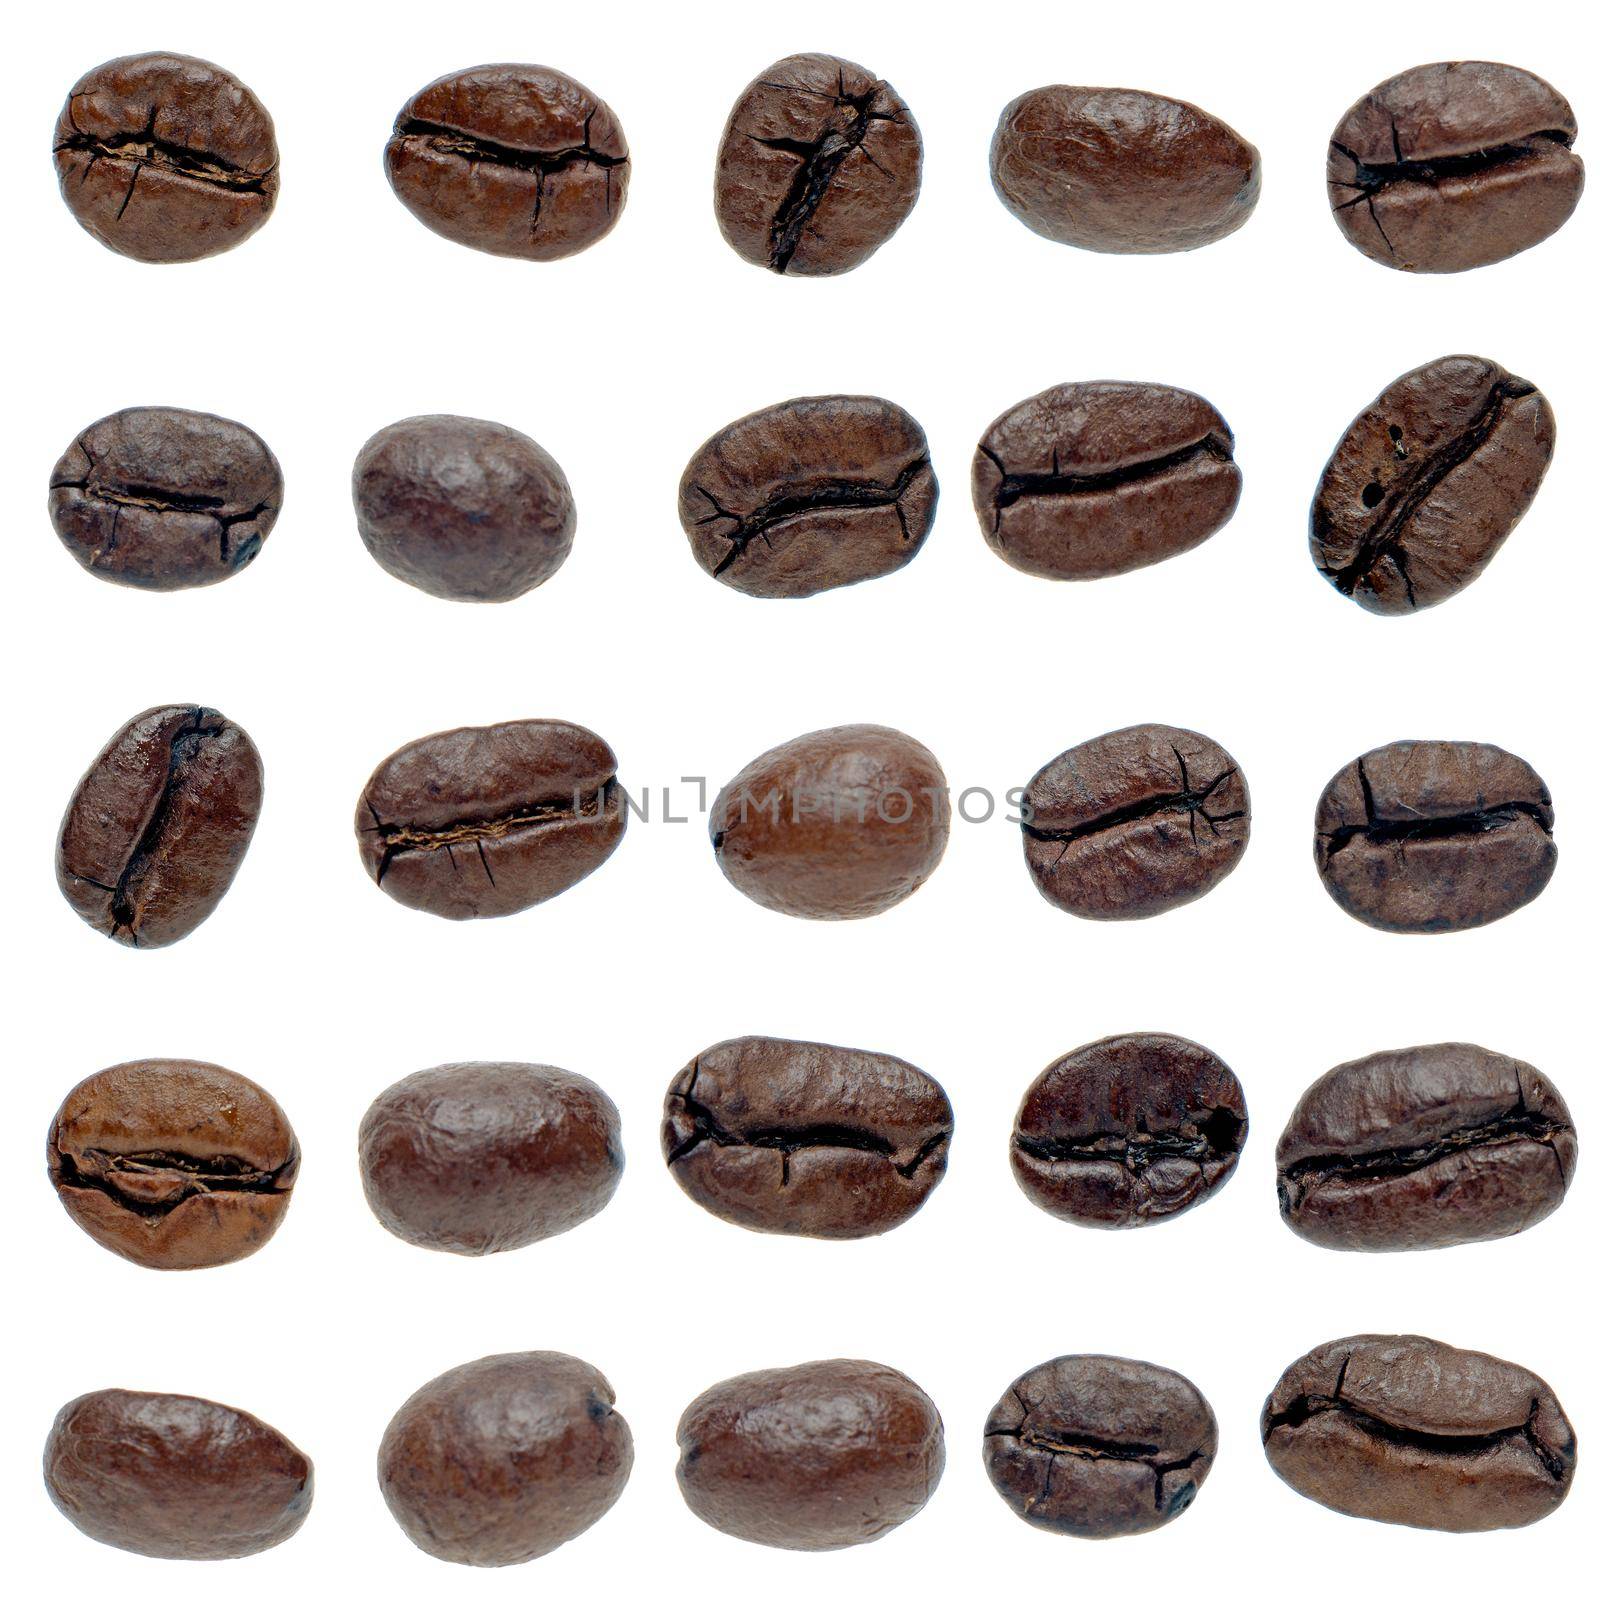 Set of coffee beans isolated on white background.